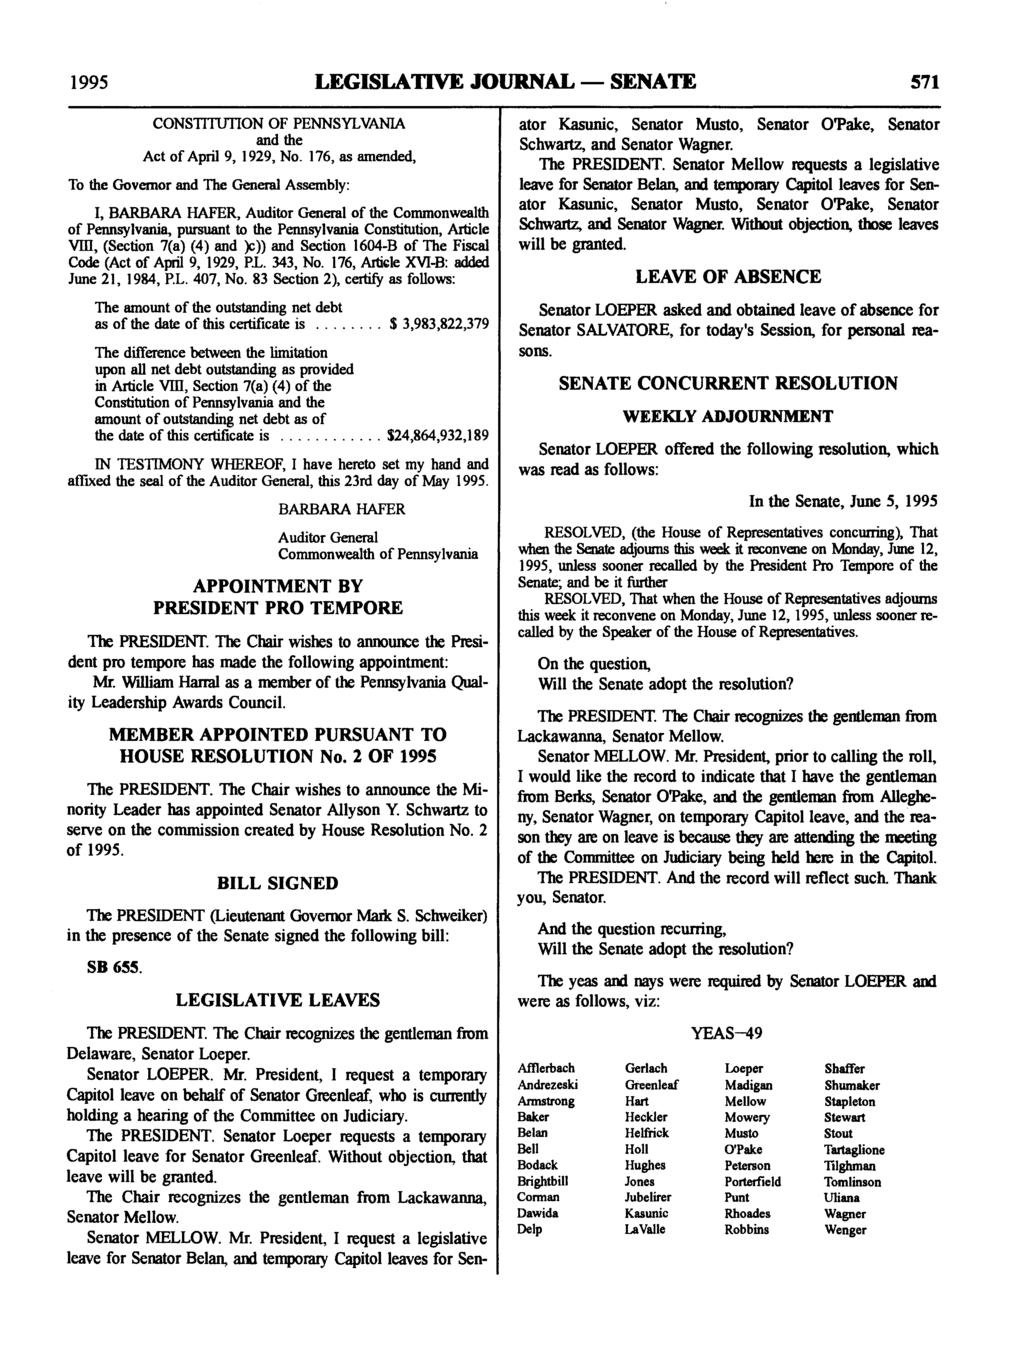 1995 LEGISLATIVE JOURNAL SENATE 571 CONSTITUTION OF PENNSYLVANIA and the Act of April 9, 1929, No. 176, as amended.